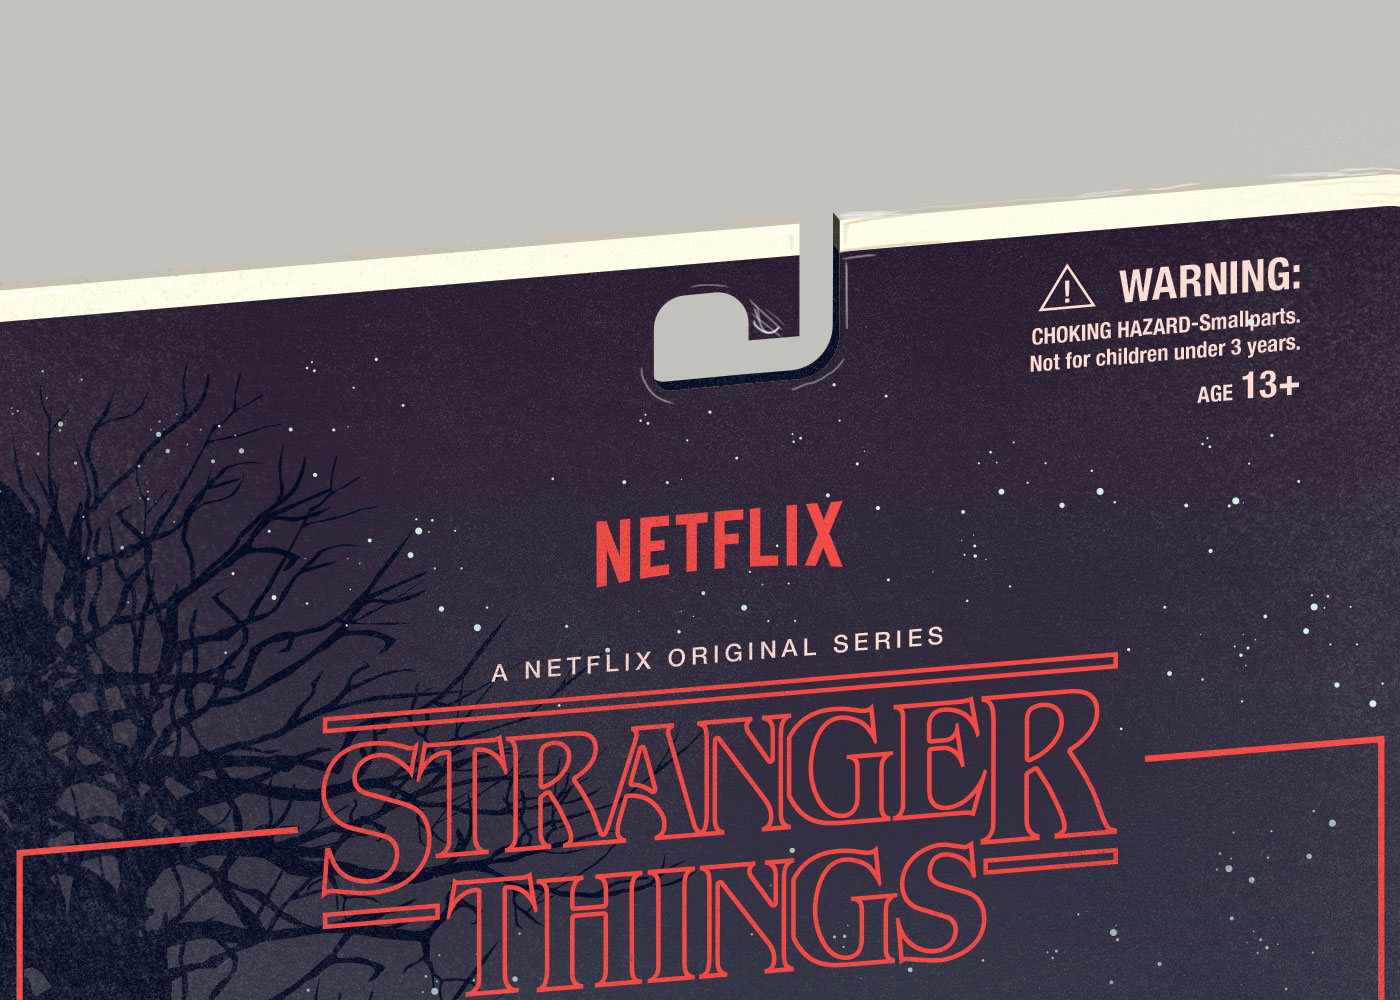 Stranger Things Action Figures Netflix eleven Movies tv ILLUSTRATION  toy product